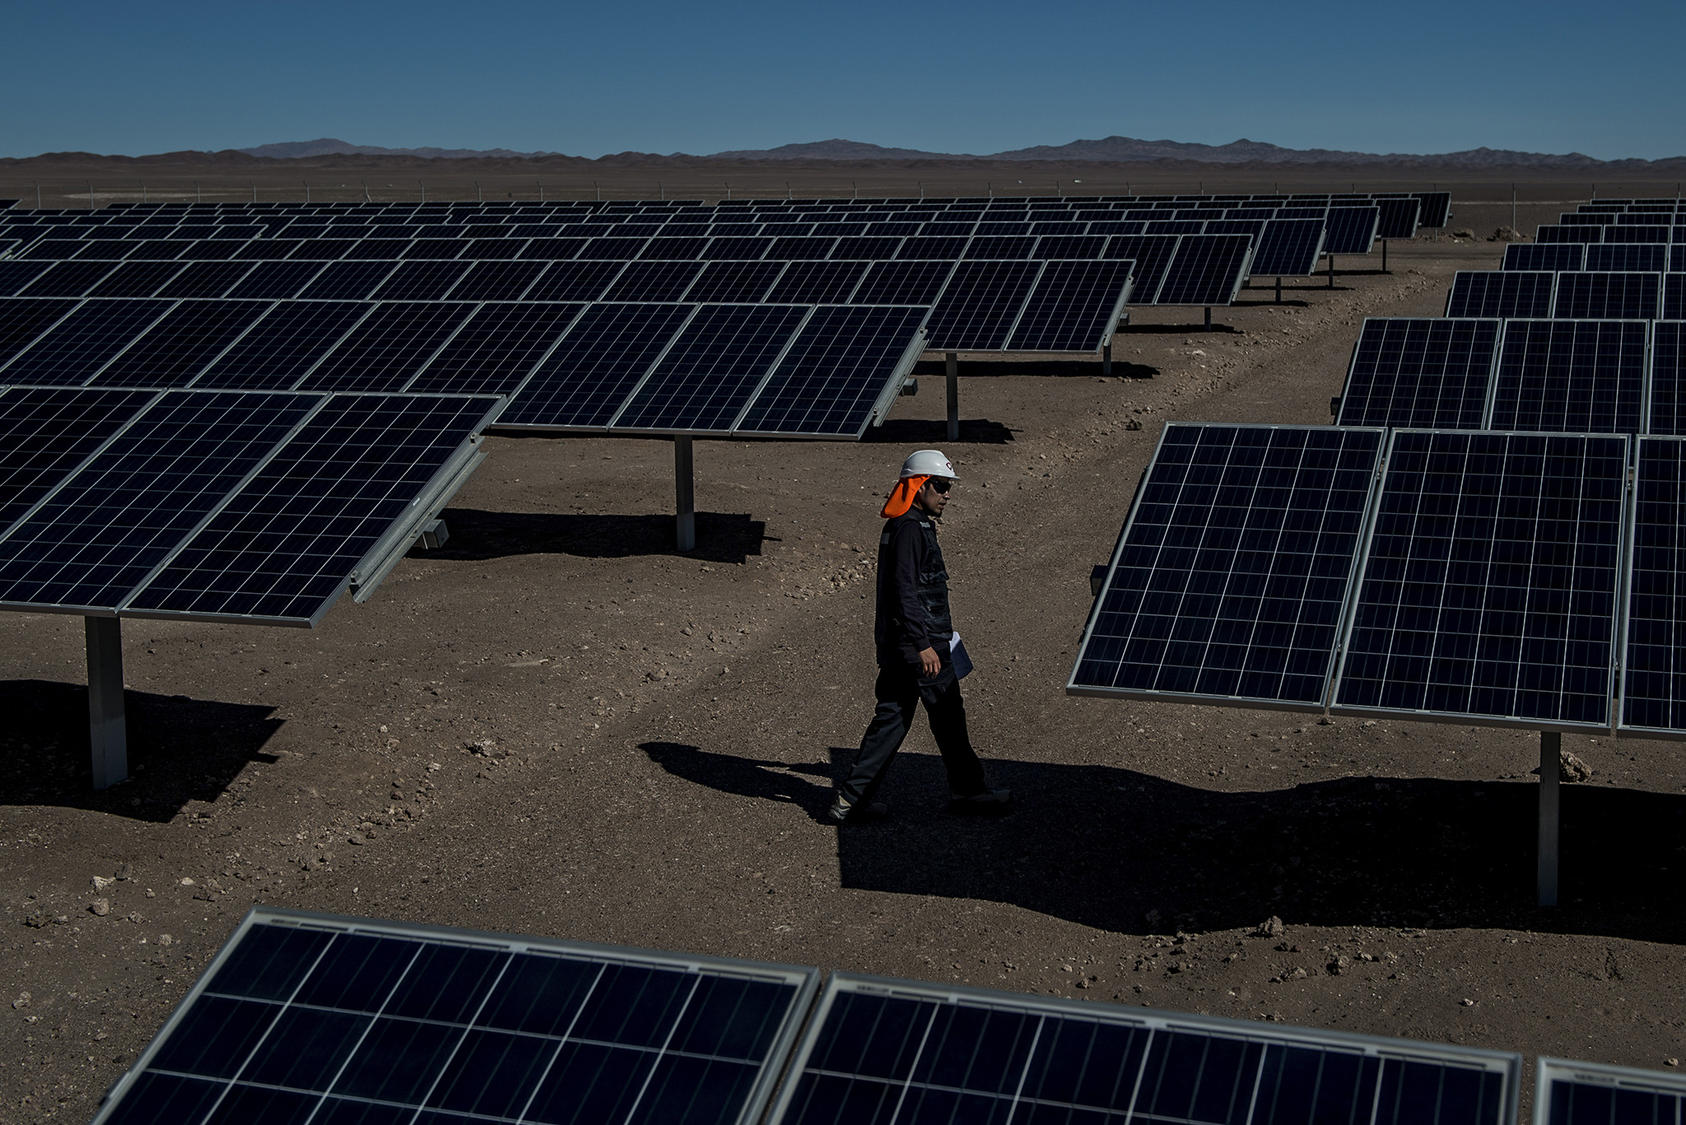 A worker inspects solar panels at a solar field in the Atacama Desert in Calama, Chile. June 21, 2017. (Meridith Kohut/The New York Times)